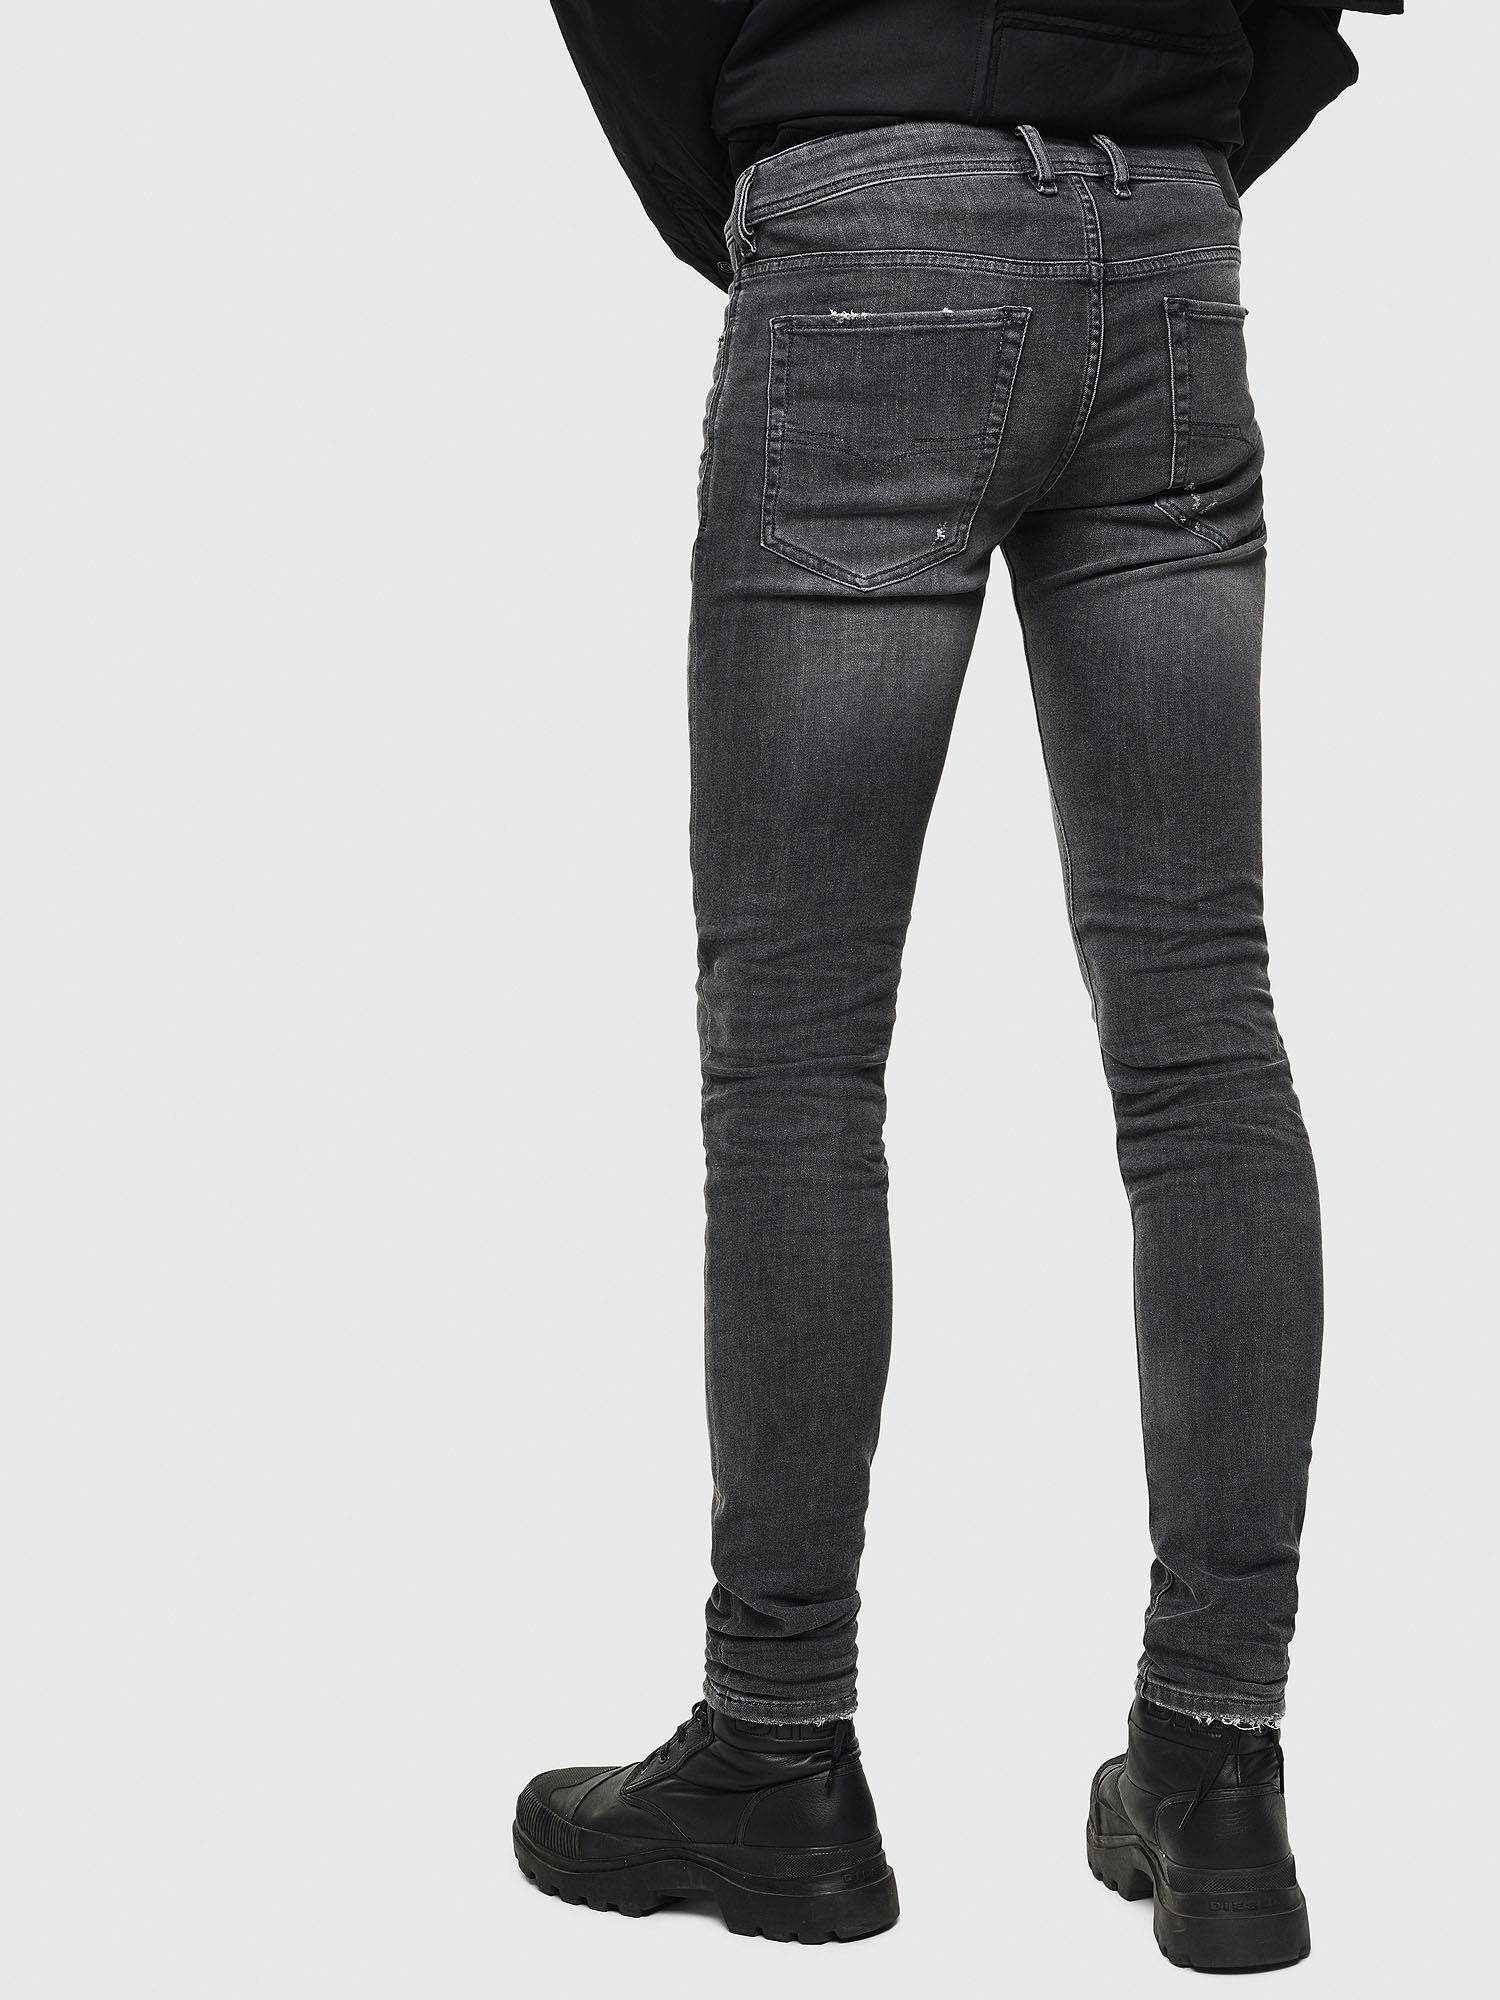 embroidered skinny jeans mens